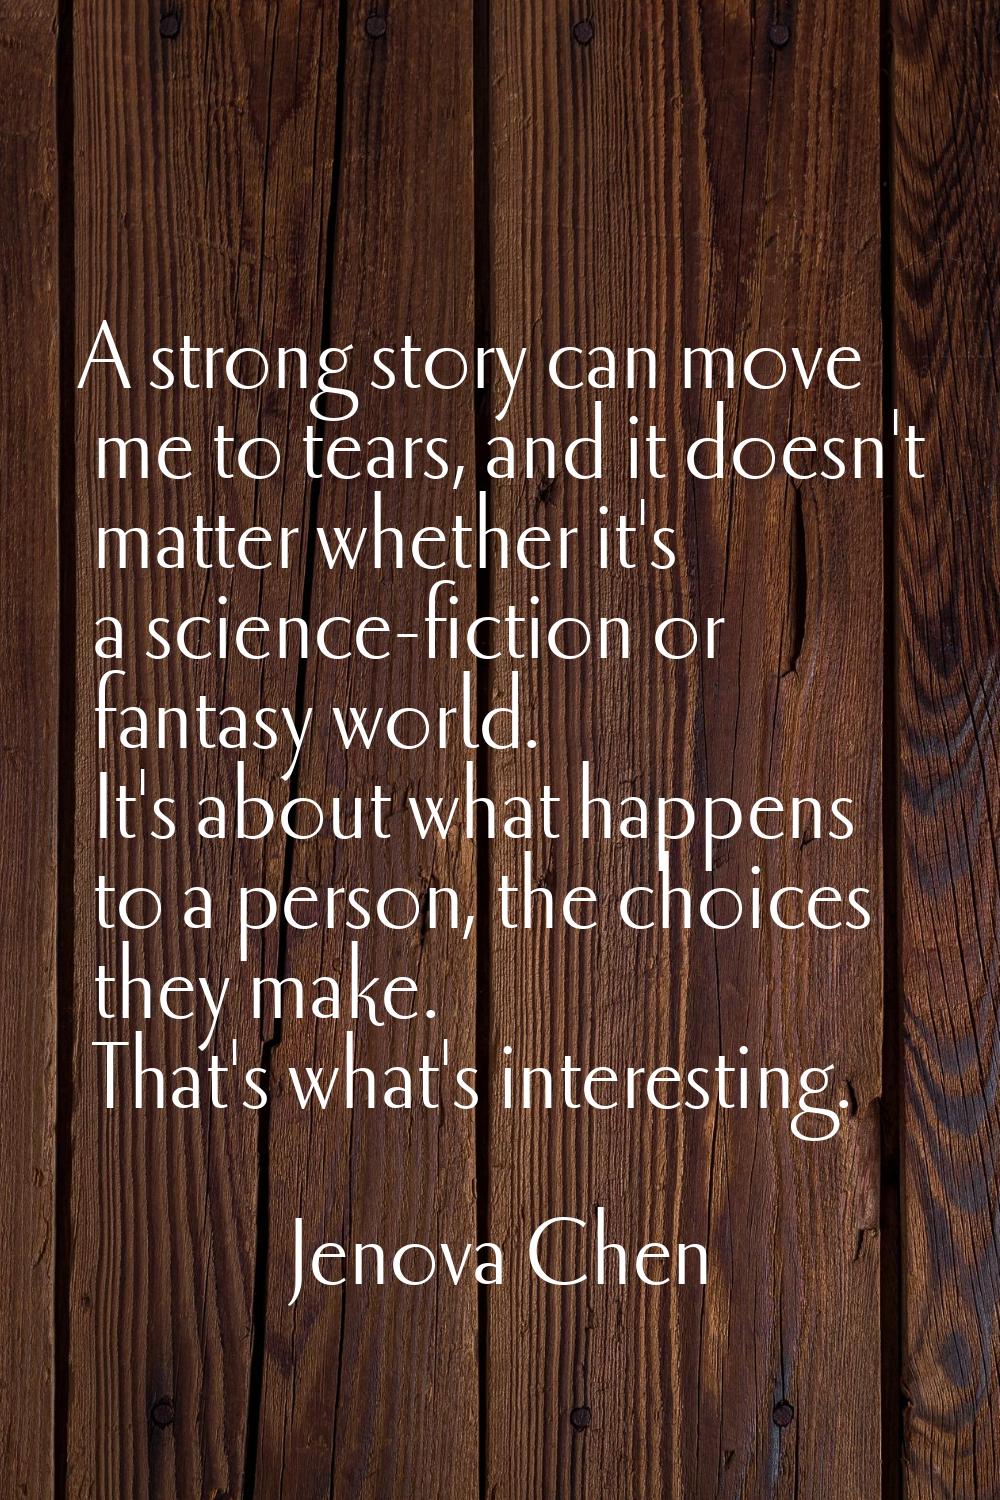 A strong story can move me to tears, and it doesn't matter whether it's a science-fiction or fantas